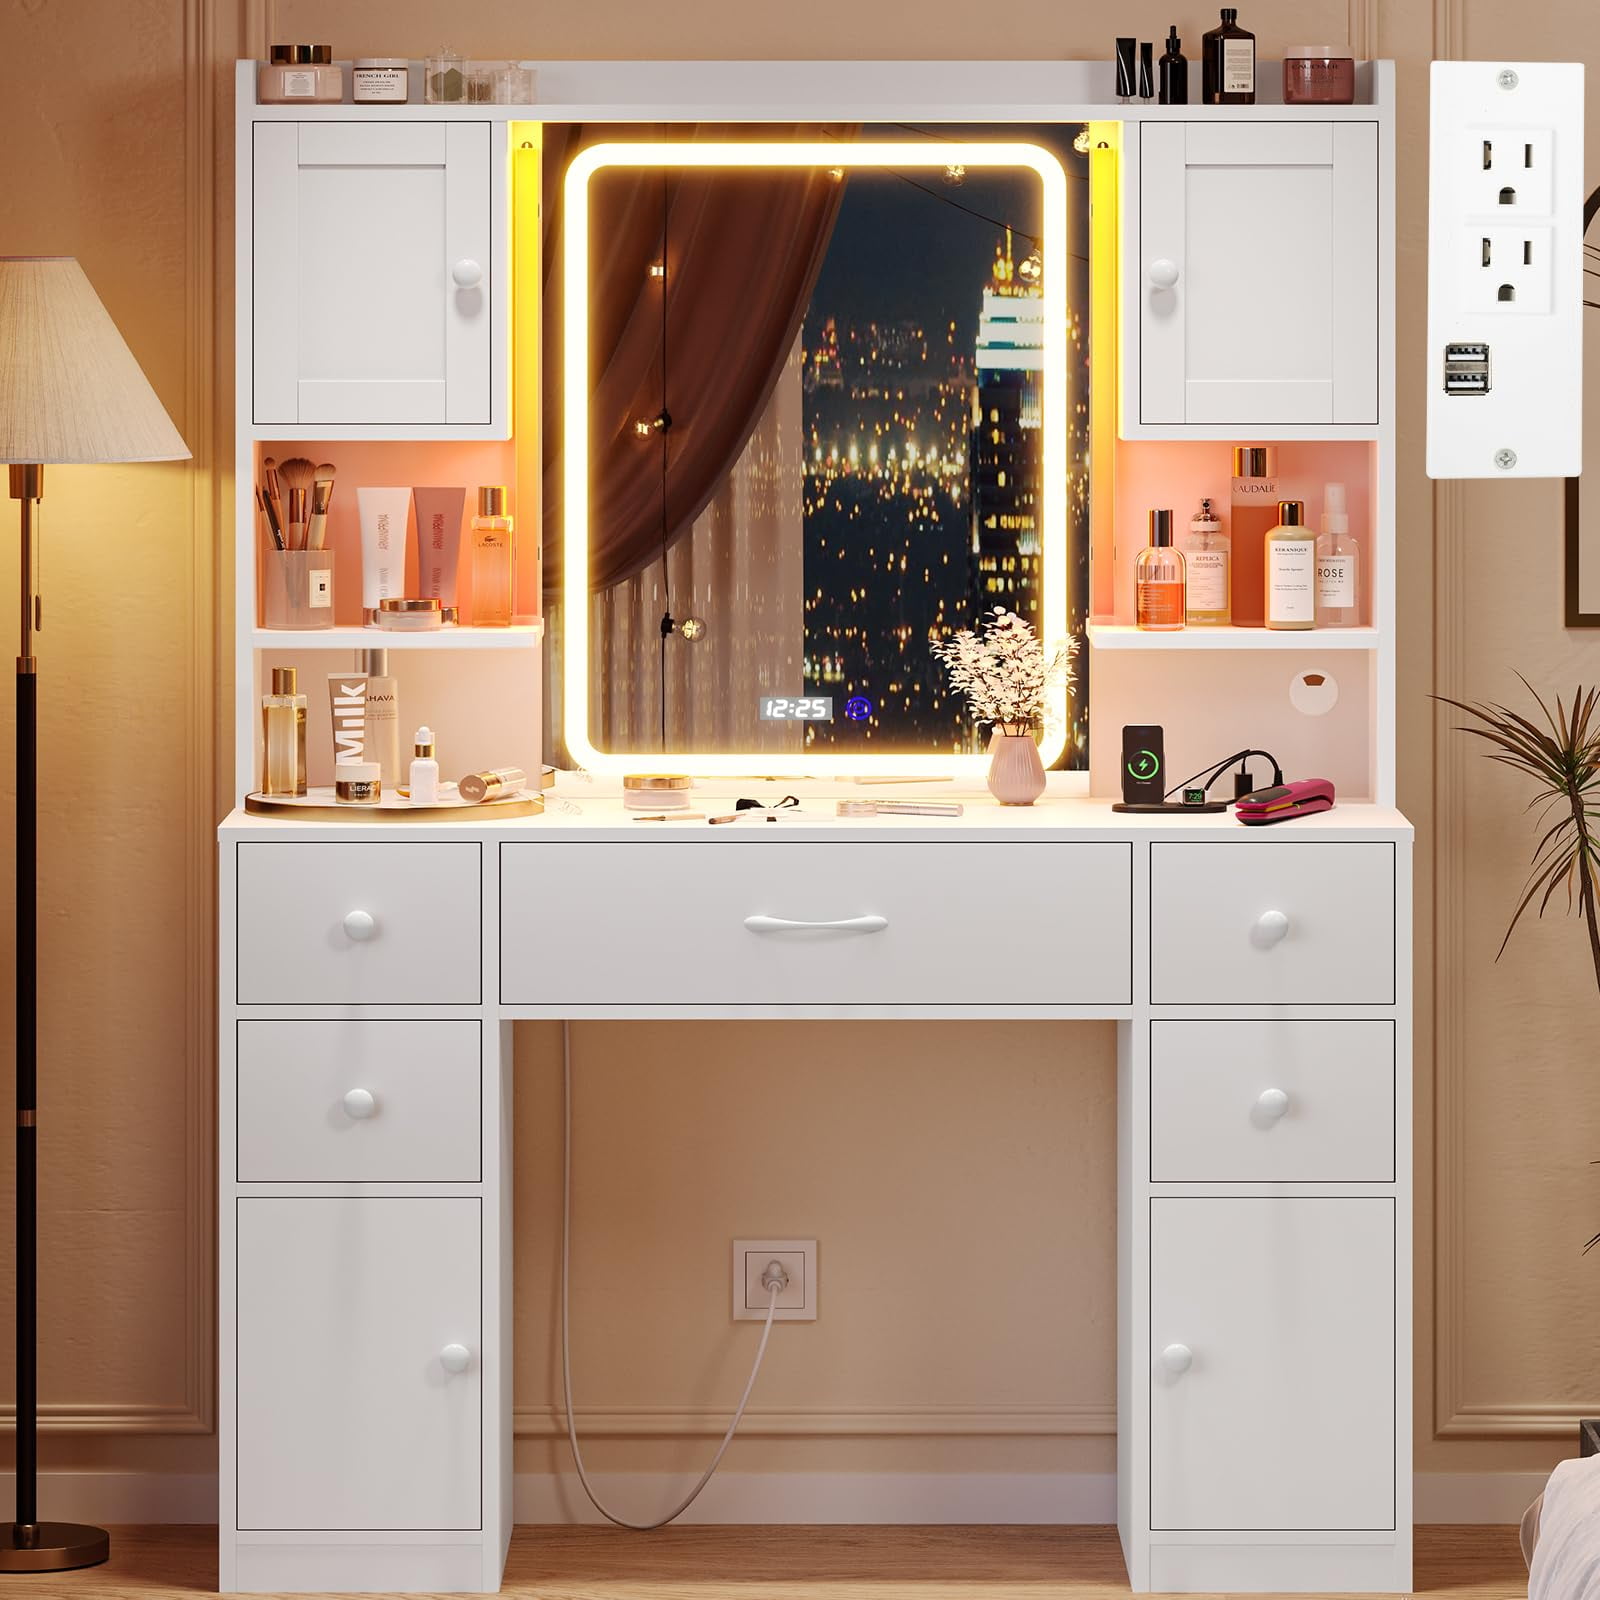 Boahaus Alana Black Vanity Desk Crystal White and Ball 5 with Mirror Drawers, Lights, Knobs